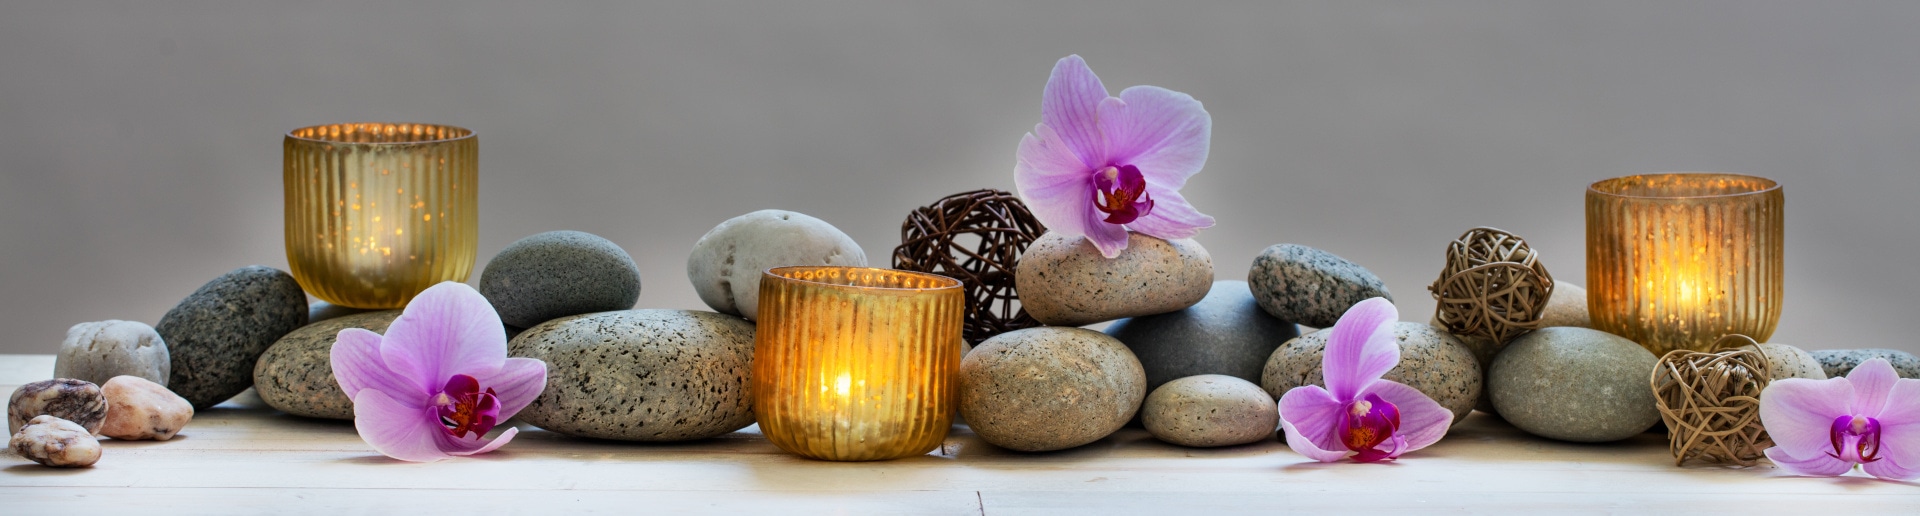 Concept of wellbeing with pebbles, orchids and candles, panorami